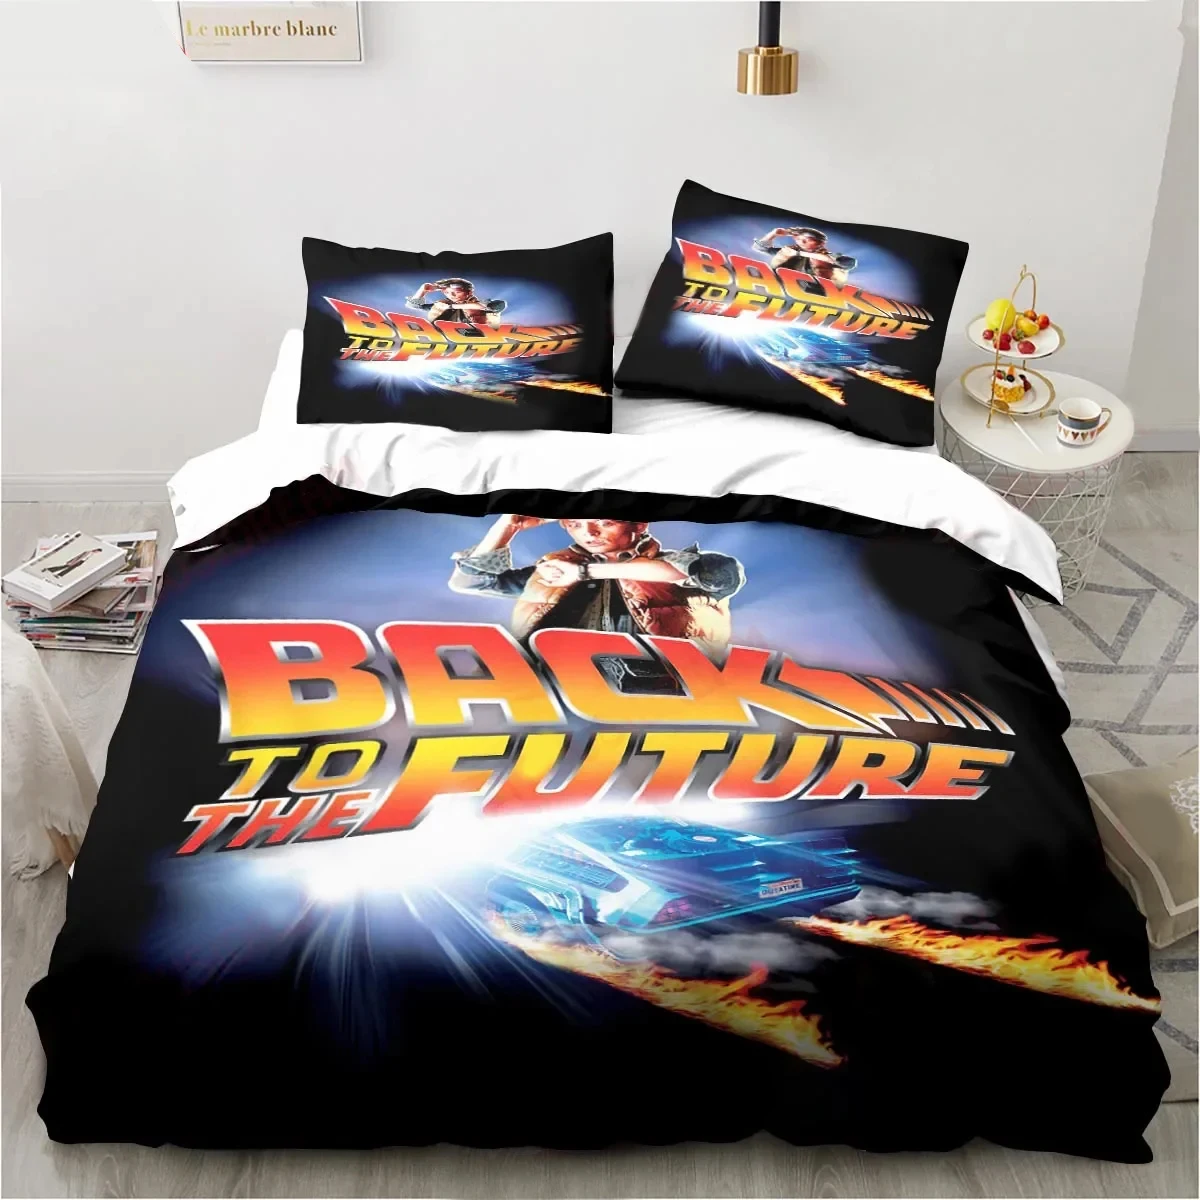 

Movie Back To The Future Canary Bedding Set Duvet Cover Bed Set Quilt Cover Pillowcase Comforter king Queen Size Boys Adult